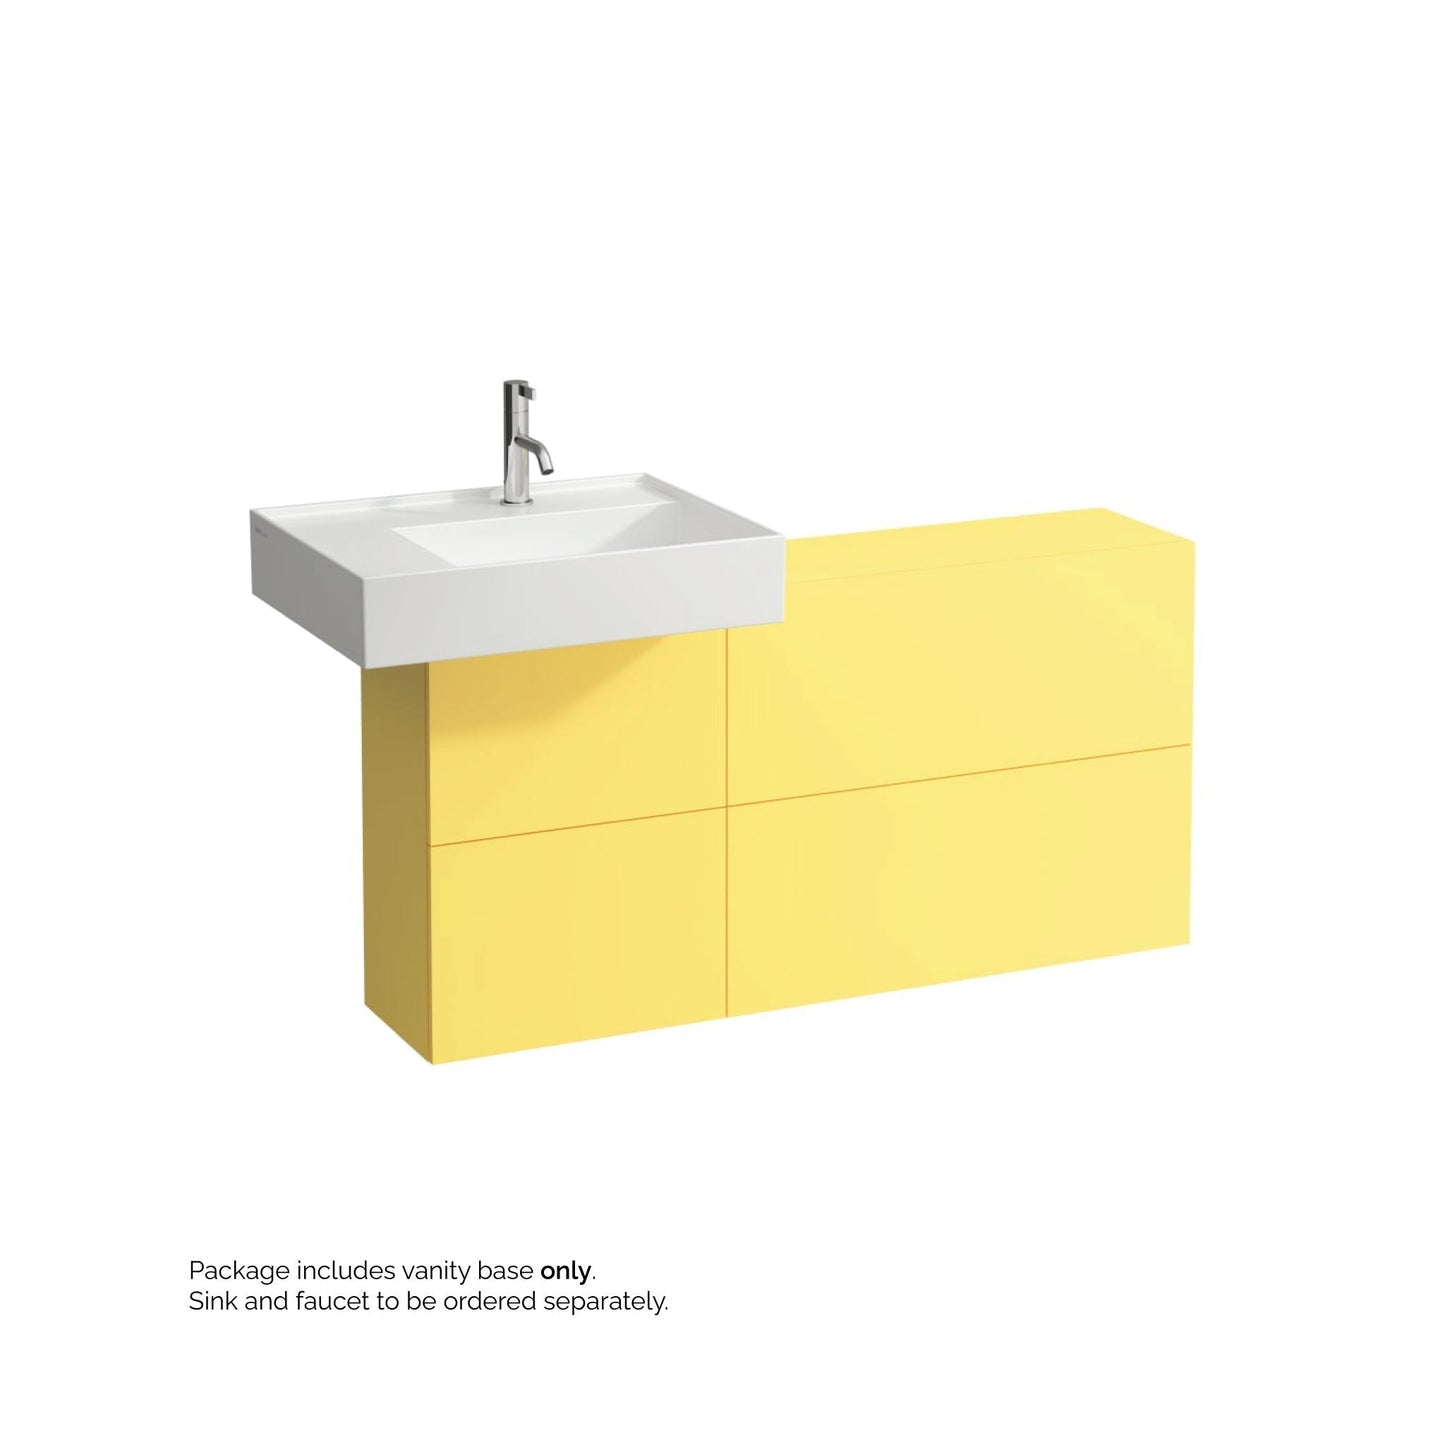 Laufen Kartell 47" 1-Door and 2-Flap Mustard Yellow Wall-Mounted Sideboard Vanity With Sink Placement on the Left